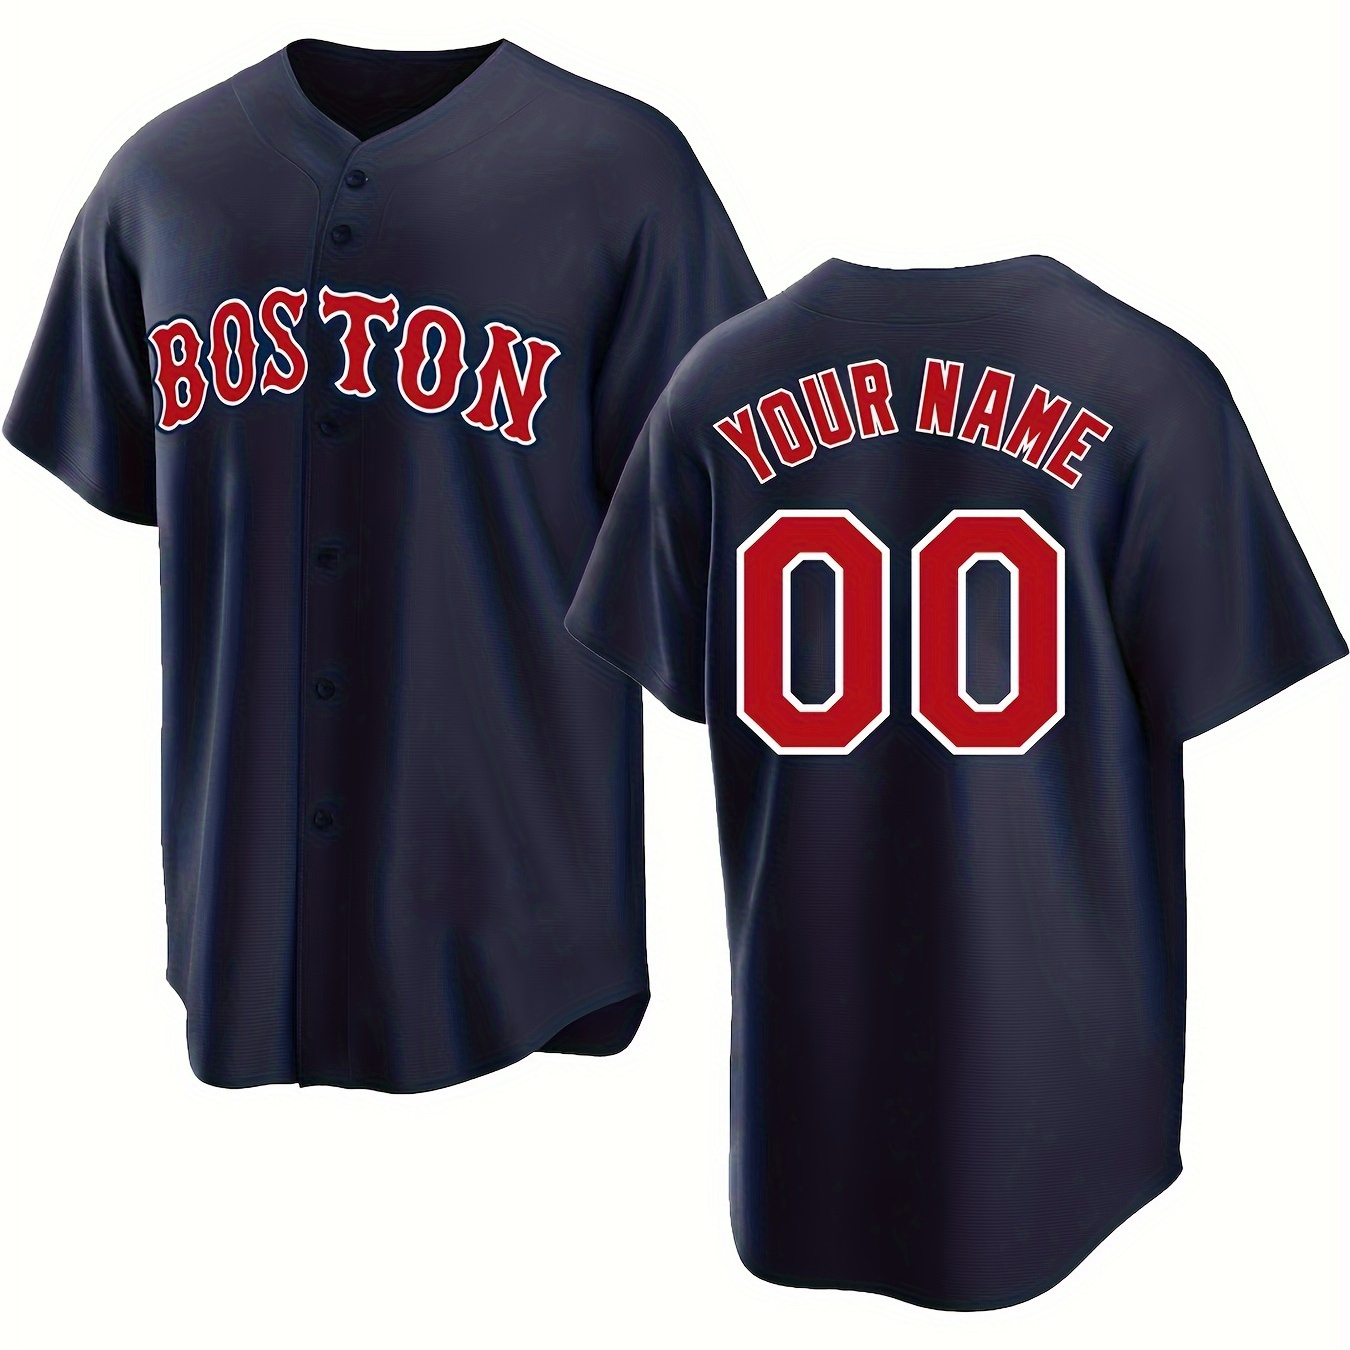 

Men's , Name & Numbers Boston Graphic Print Baseball Jersey T-shirt, Competition Party Training Tees, Leisure Sports Personalized Clothing